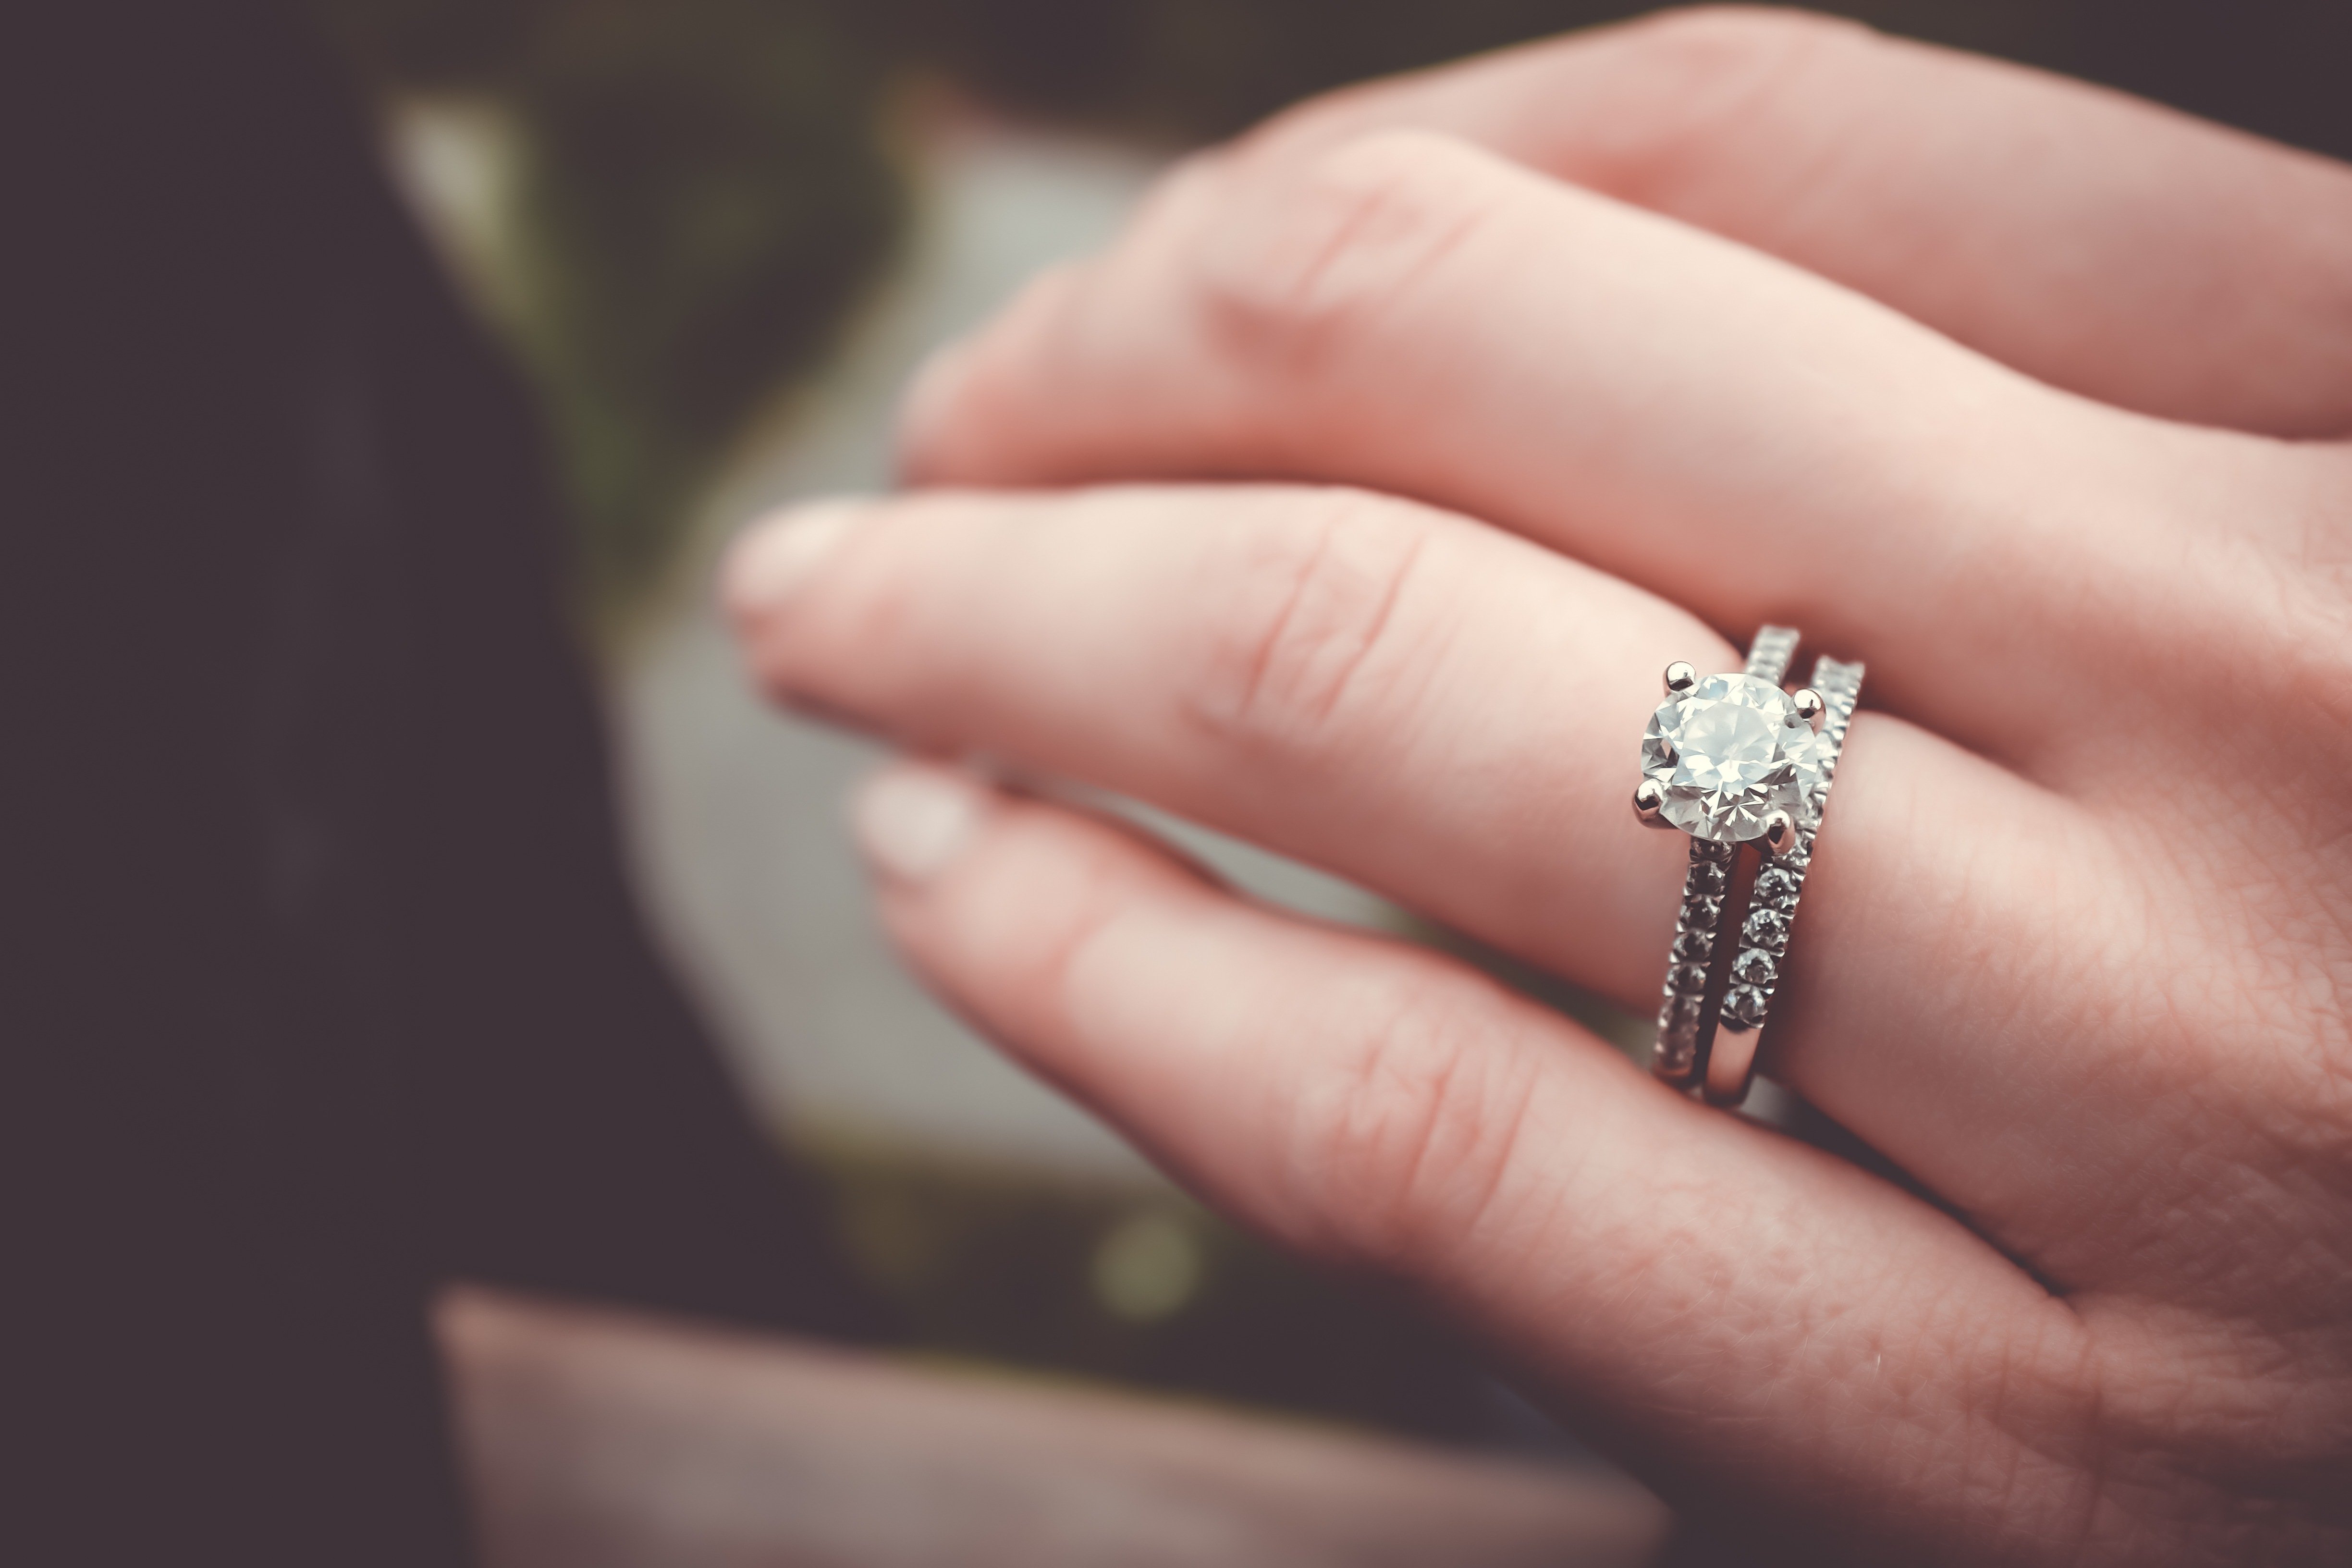 5 Neat Ways to Choose an Engagement Ring Without Breaking the Bank